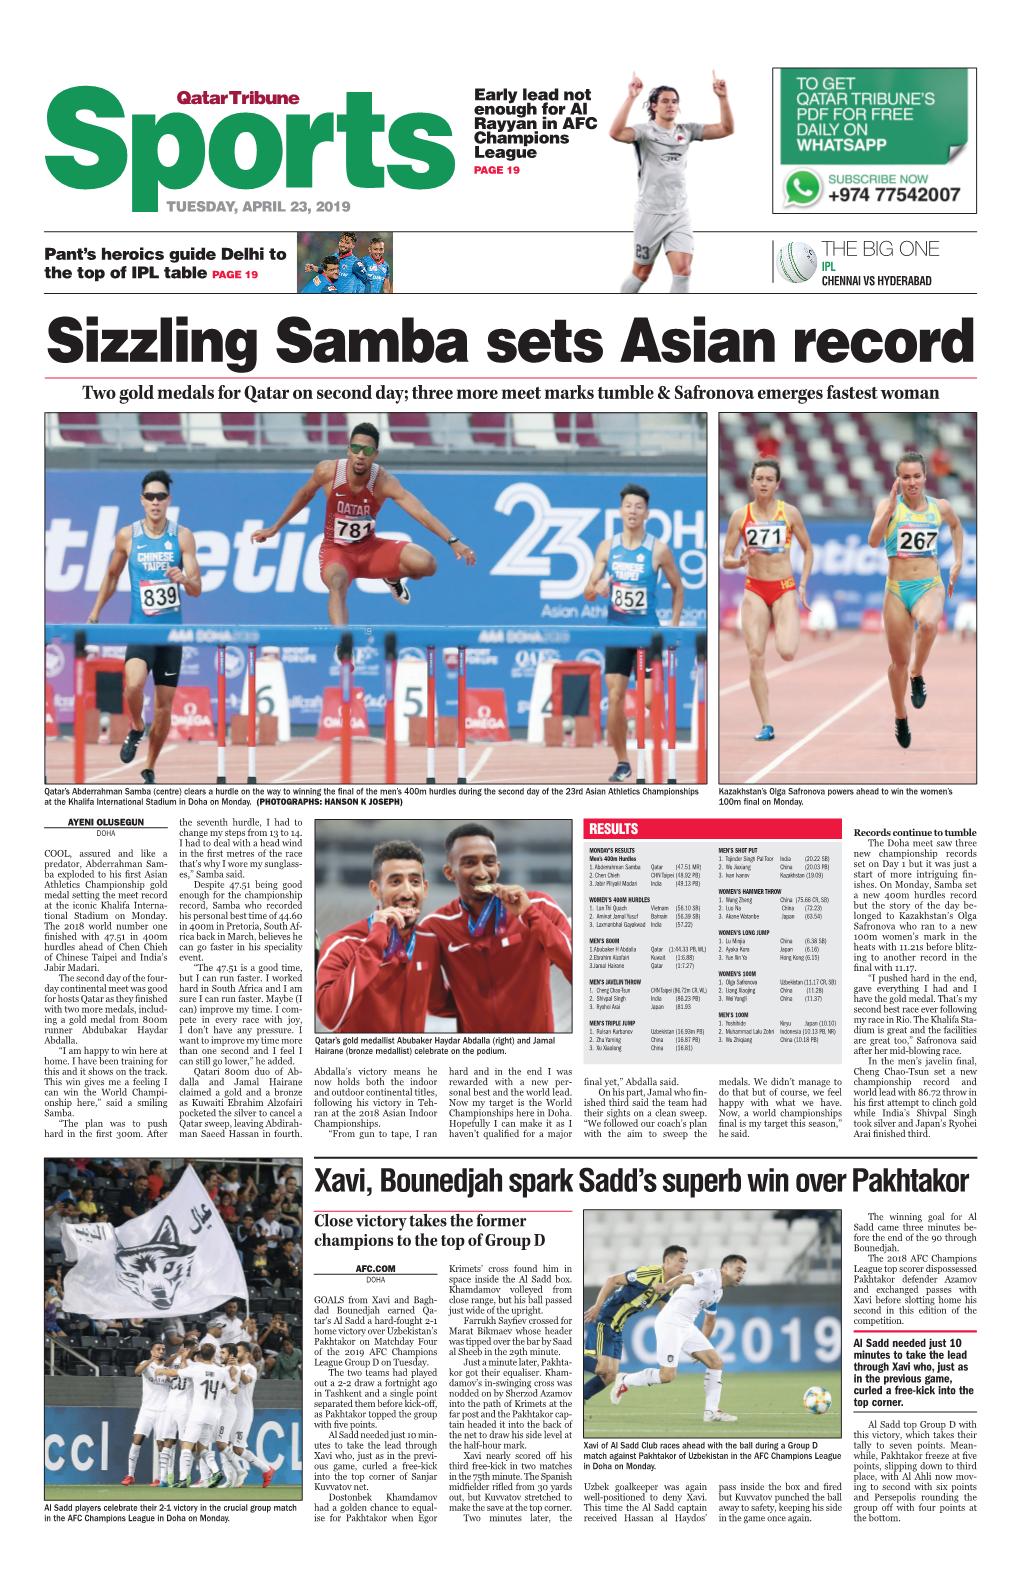 Sizzling Samba Sets Asian Record Two Gold Medals for Qatar on Second Day; Three More Meet Marks Tumble & Safronova Emerges Fastest Woman